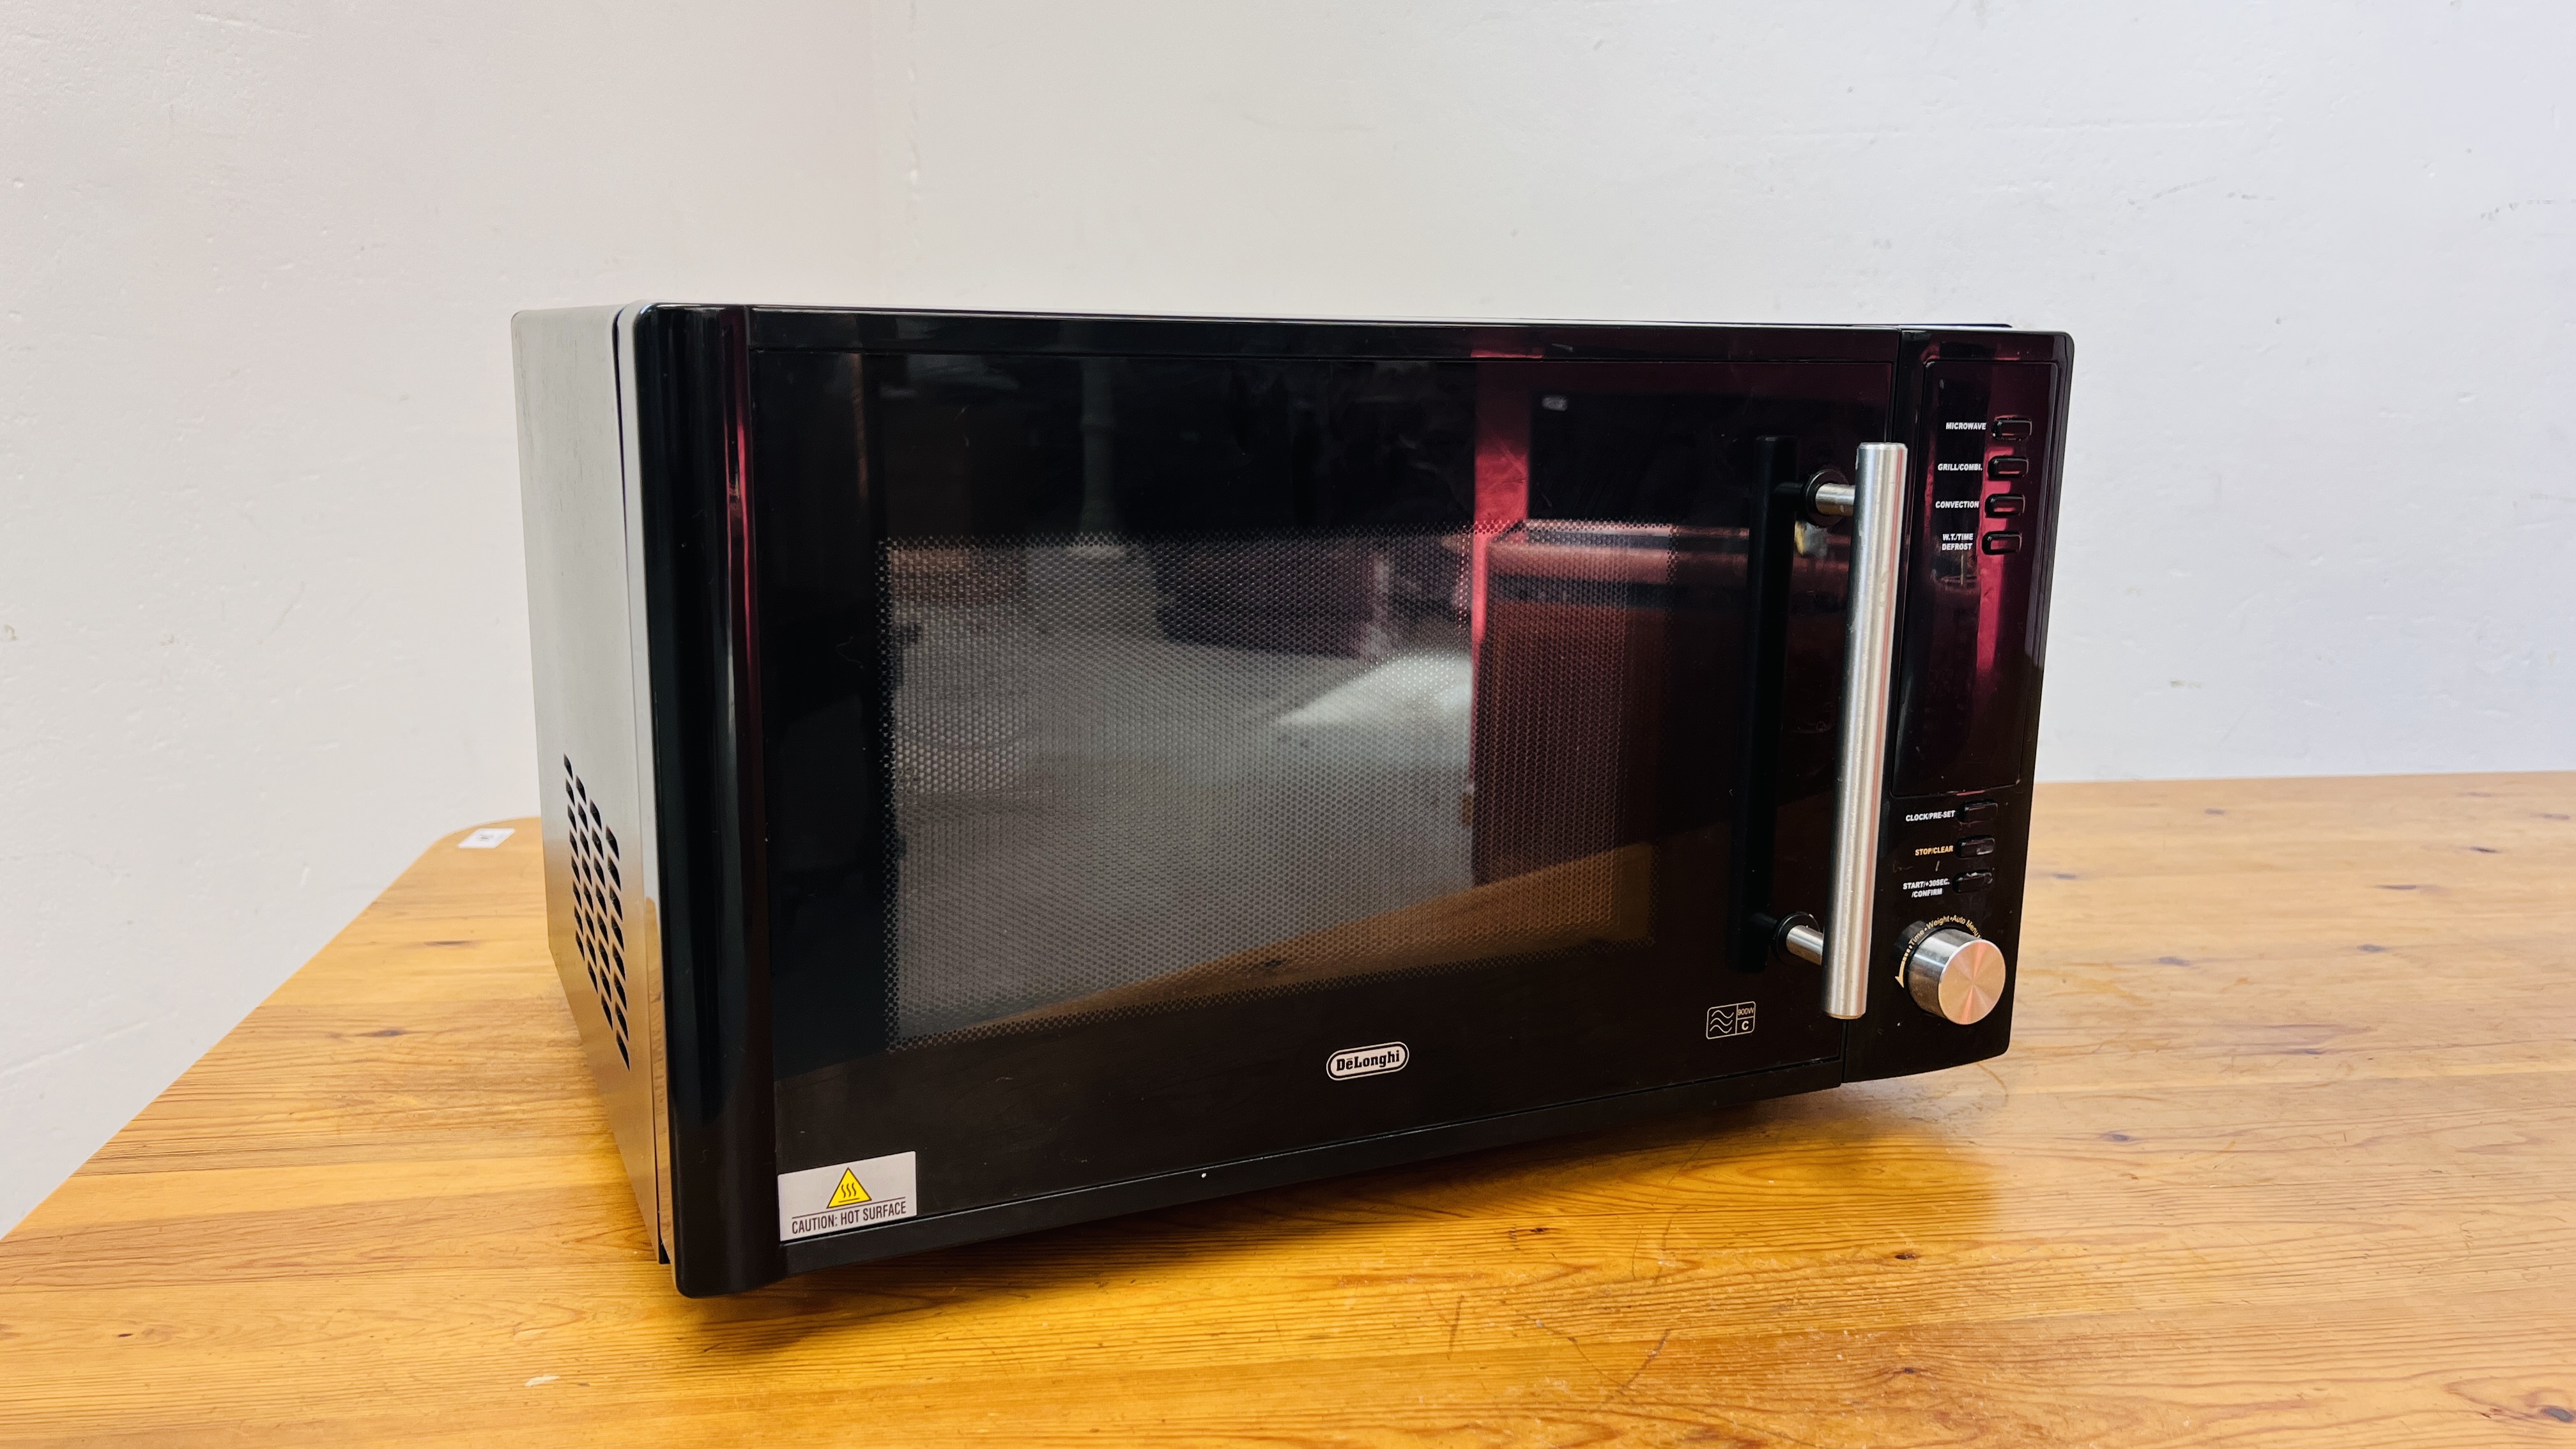 DELONGHI MICROWAVE OVEN, BLACK FINISH. - SOLD AS SEEN.